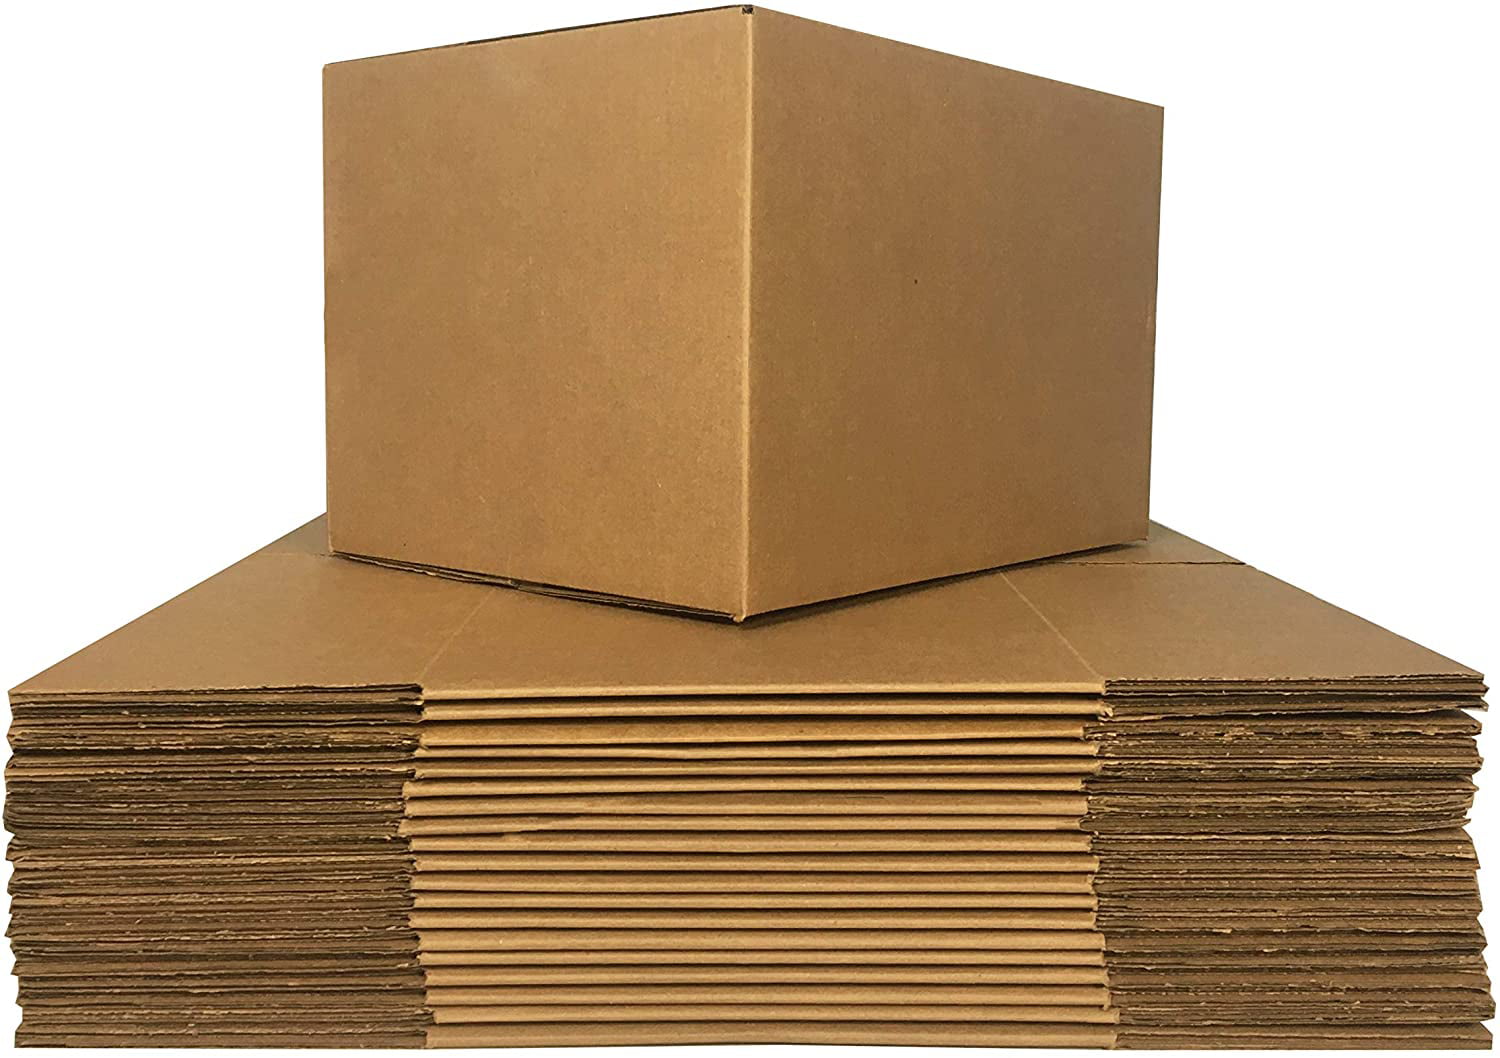 Uboxes Medium Moving Boxes 18 x 14 x 12 Bundle of 20 Best Choice 18 x 14 x 12 Mailing Fast and Quick 1 Pack Transporting Shipping and Moving Boxes. Moving Made Simple with Our Boxes 